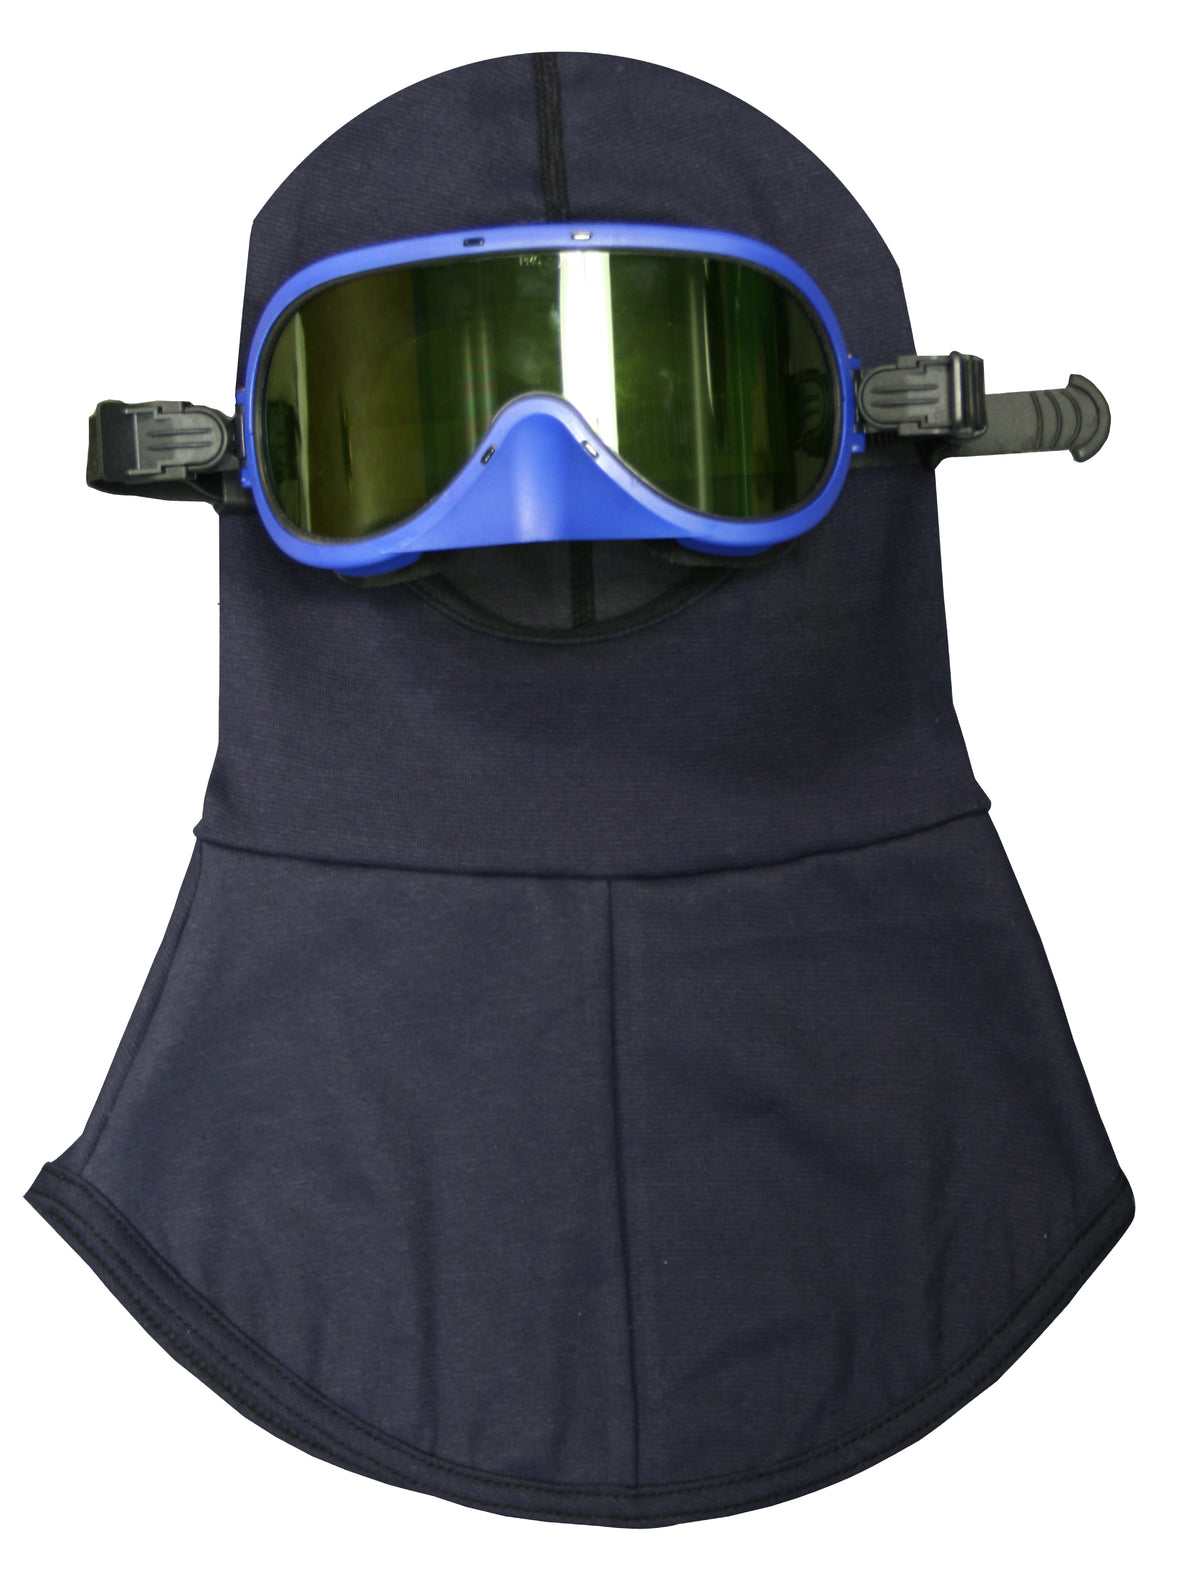 Enespro 12 cal Arc Goggle Hood System